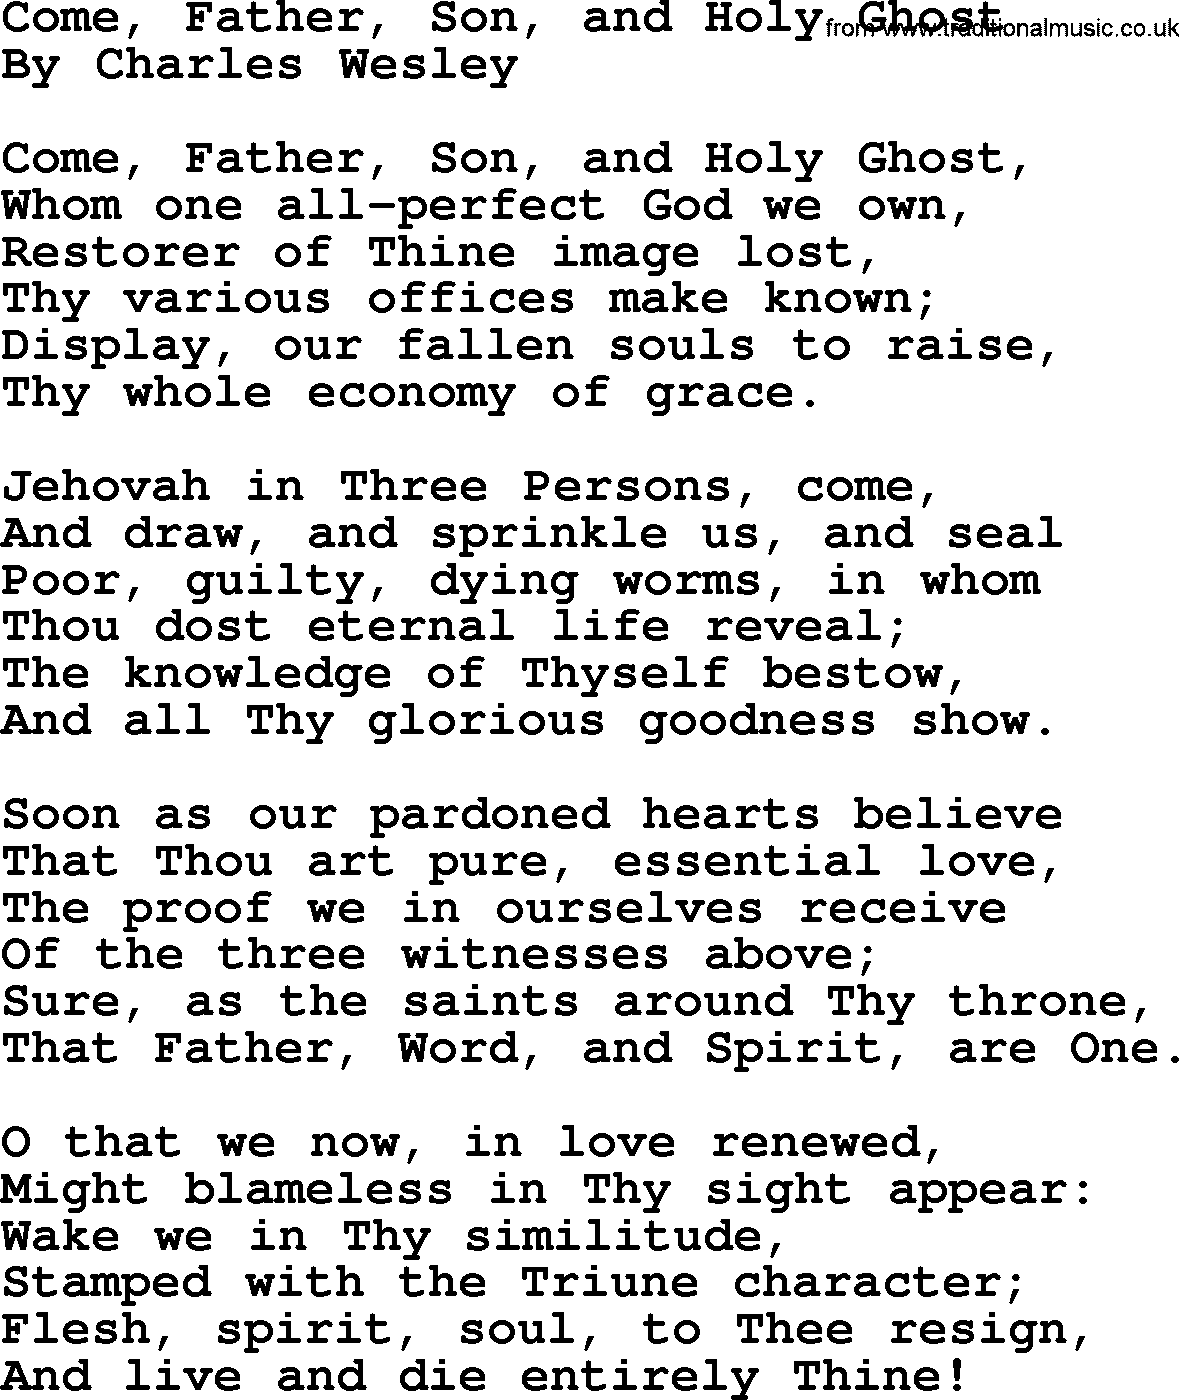 Charles Wesley hymn: Come, Father, Son, and Holy Ghost, lyrics